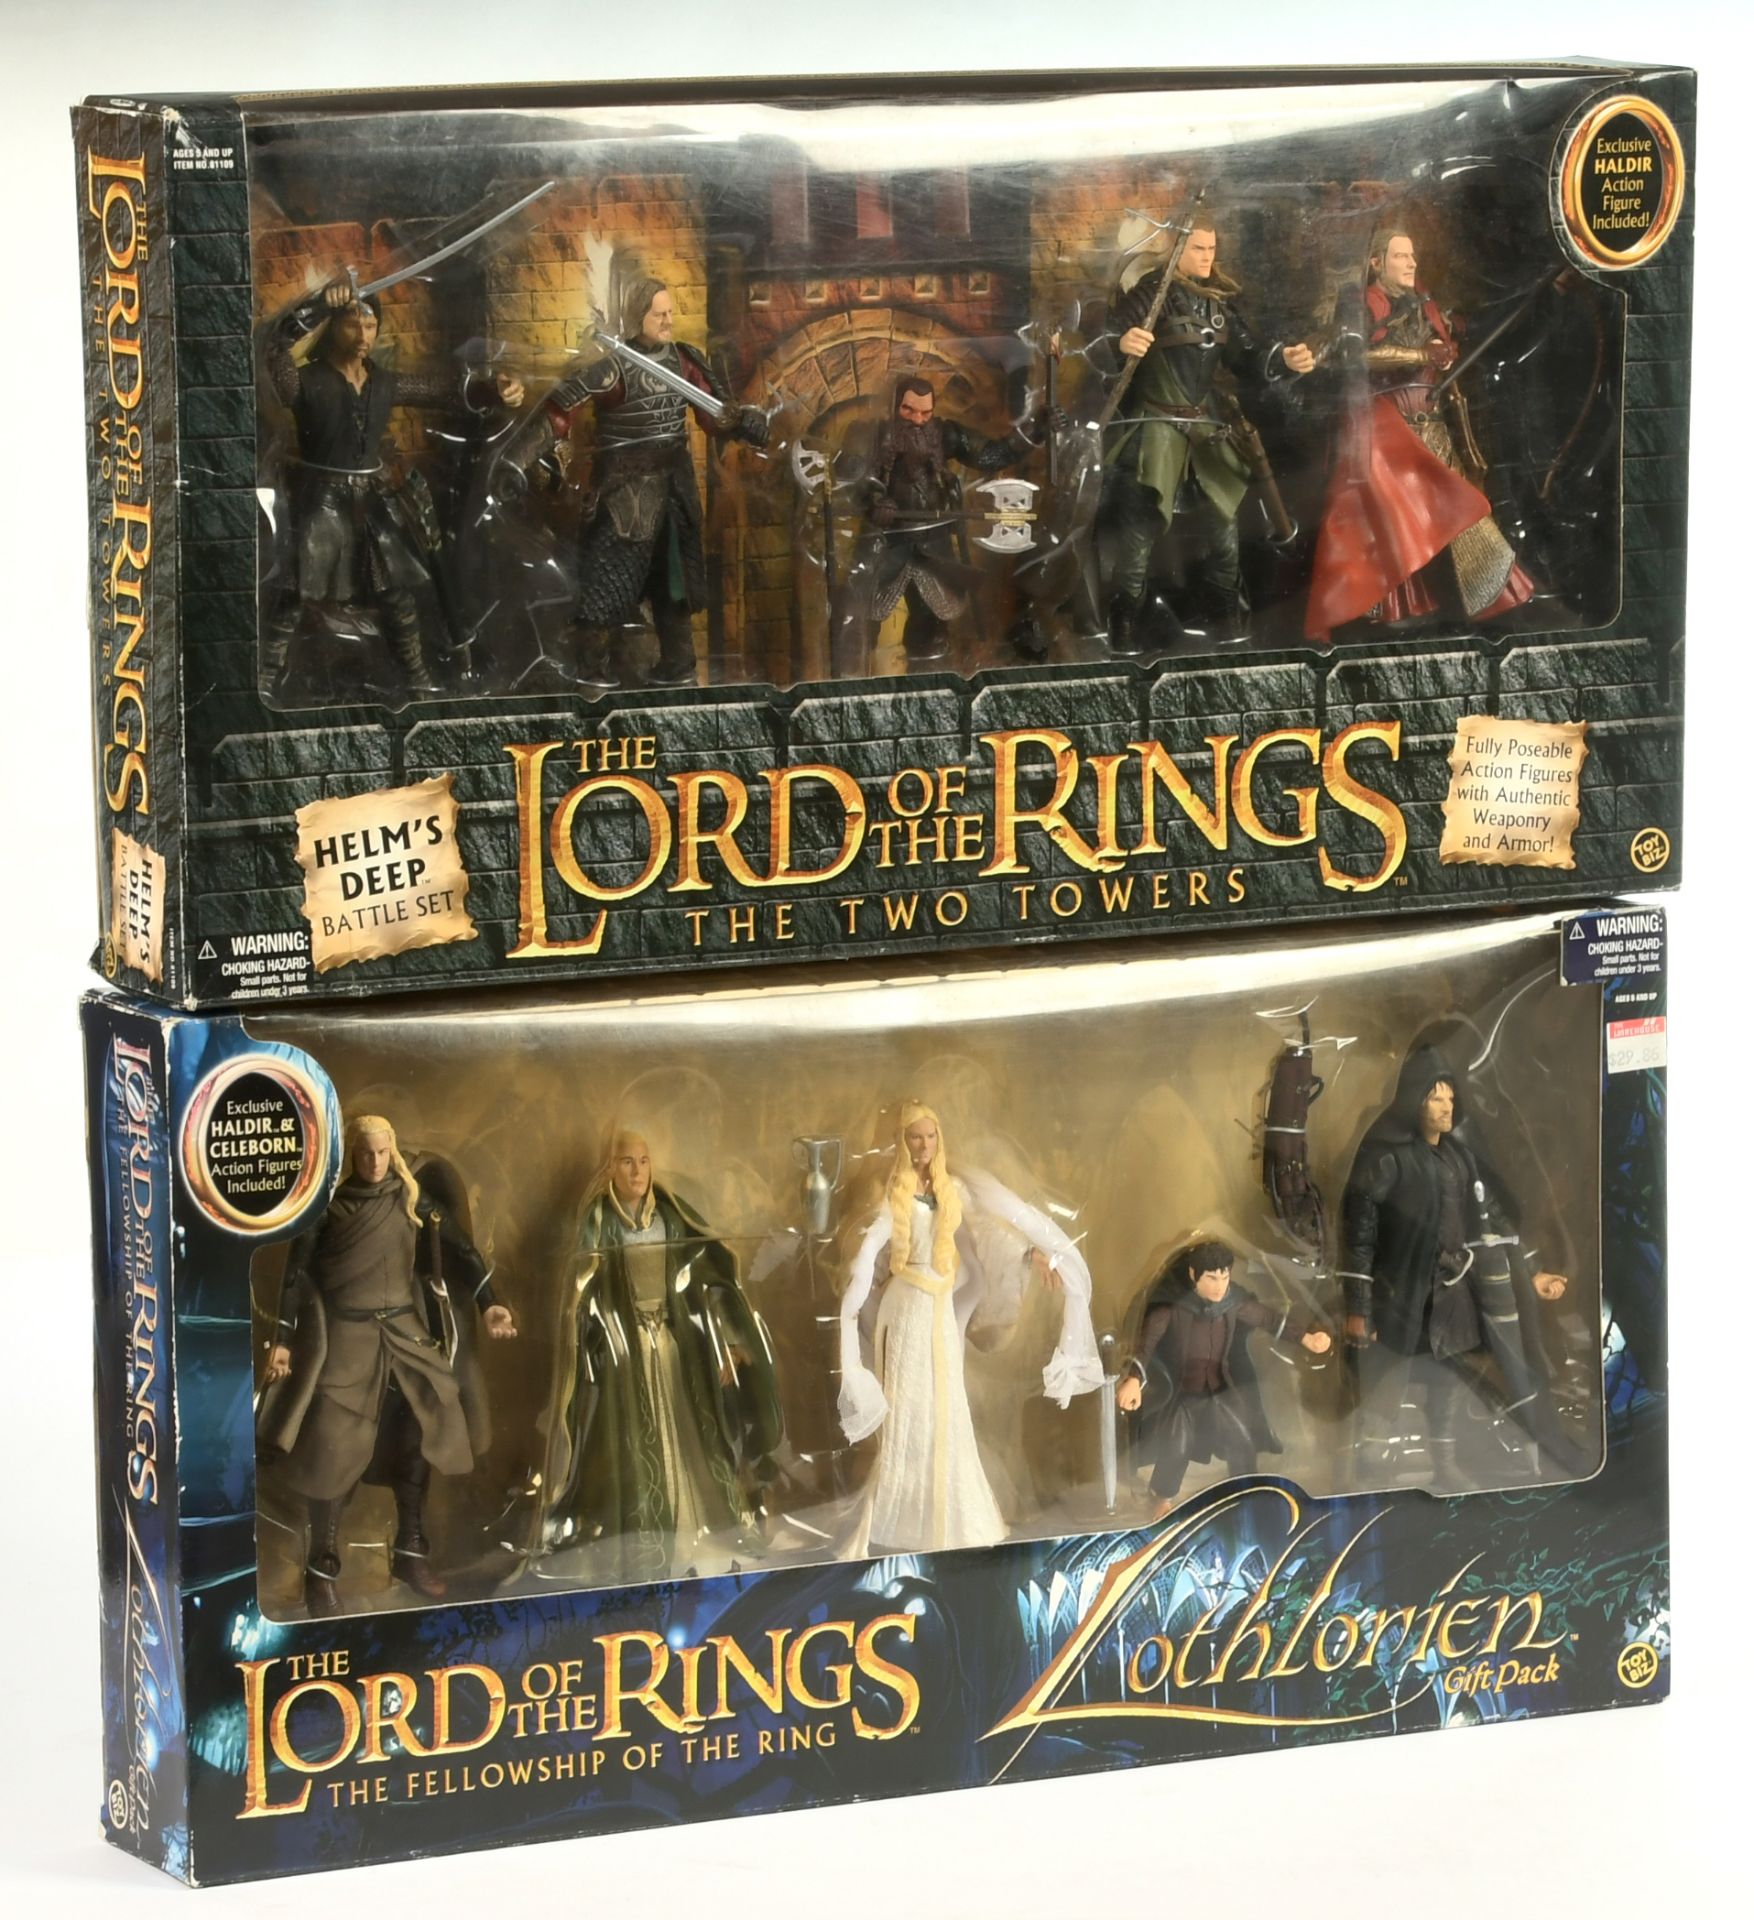 Toy Biz The Lord of the Rings figure packs x 2